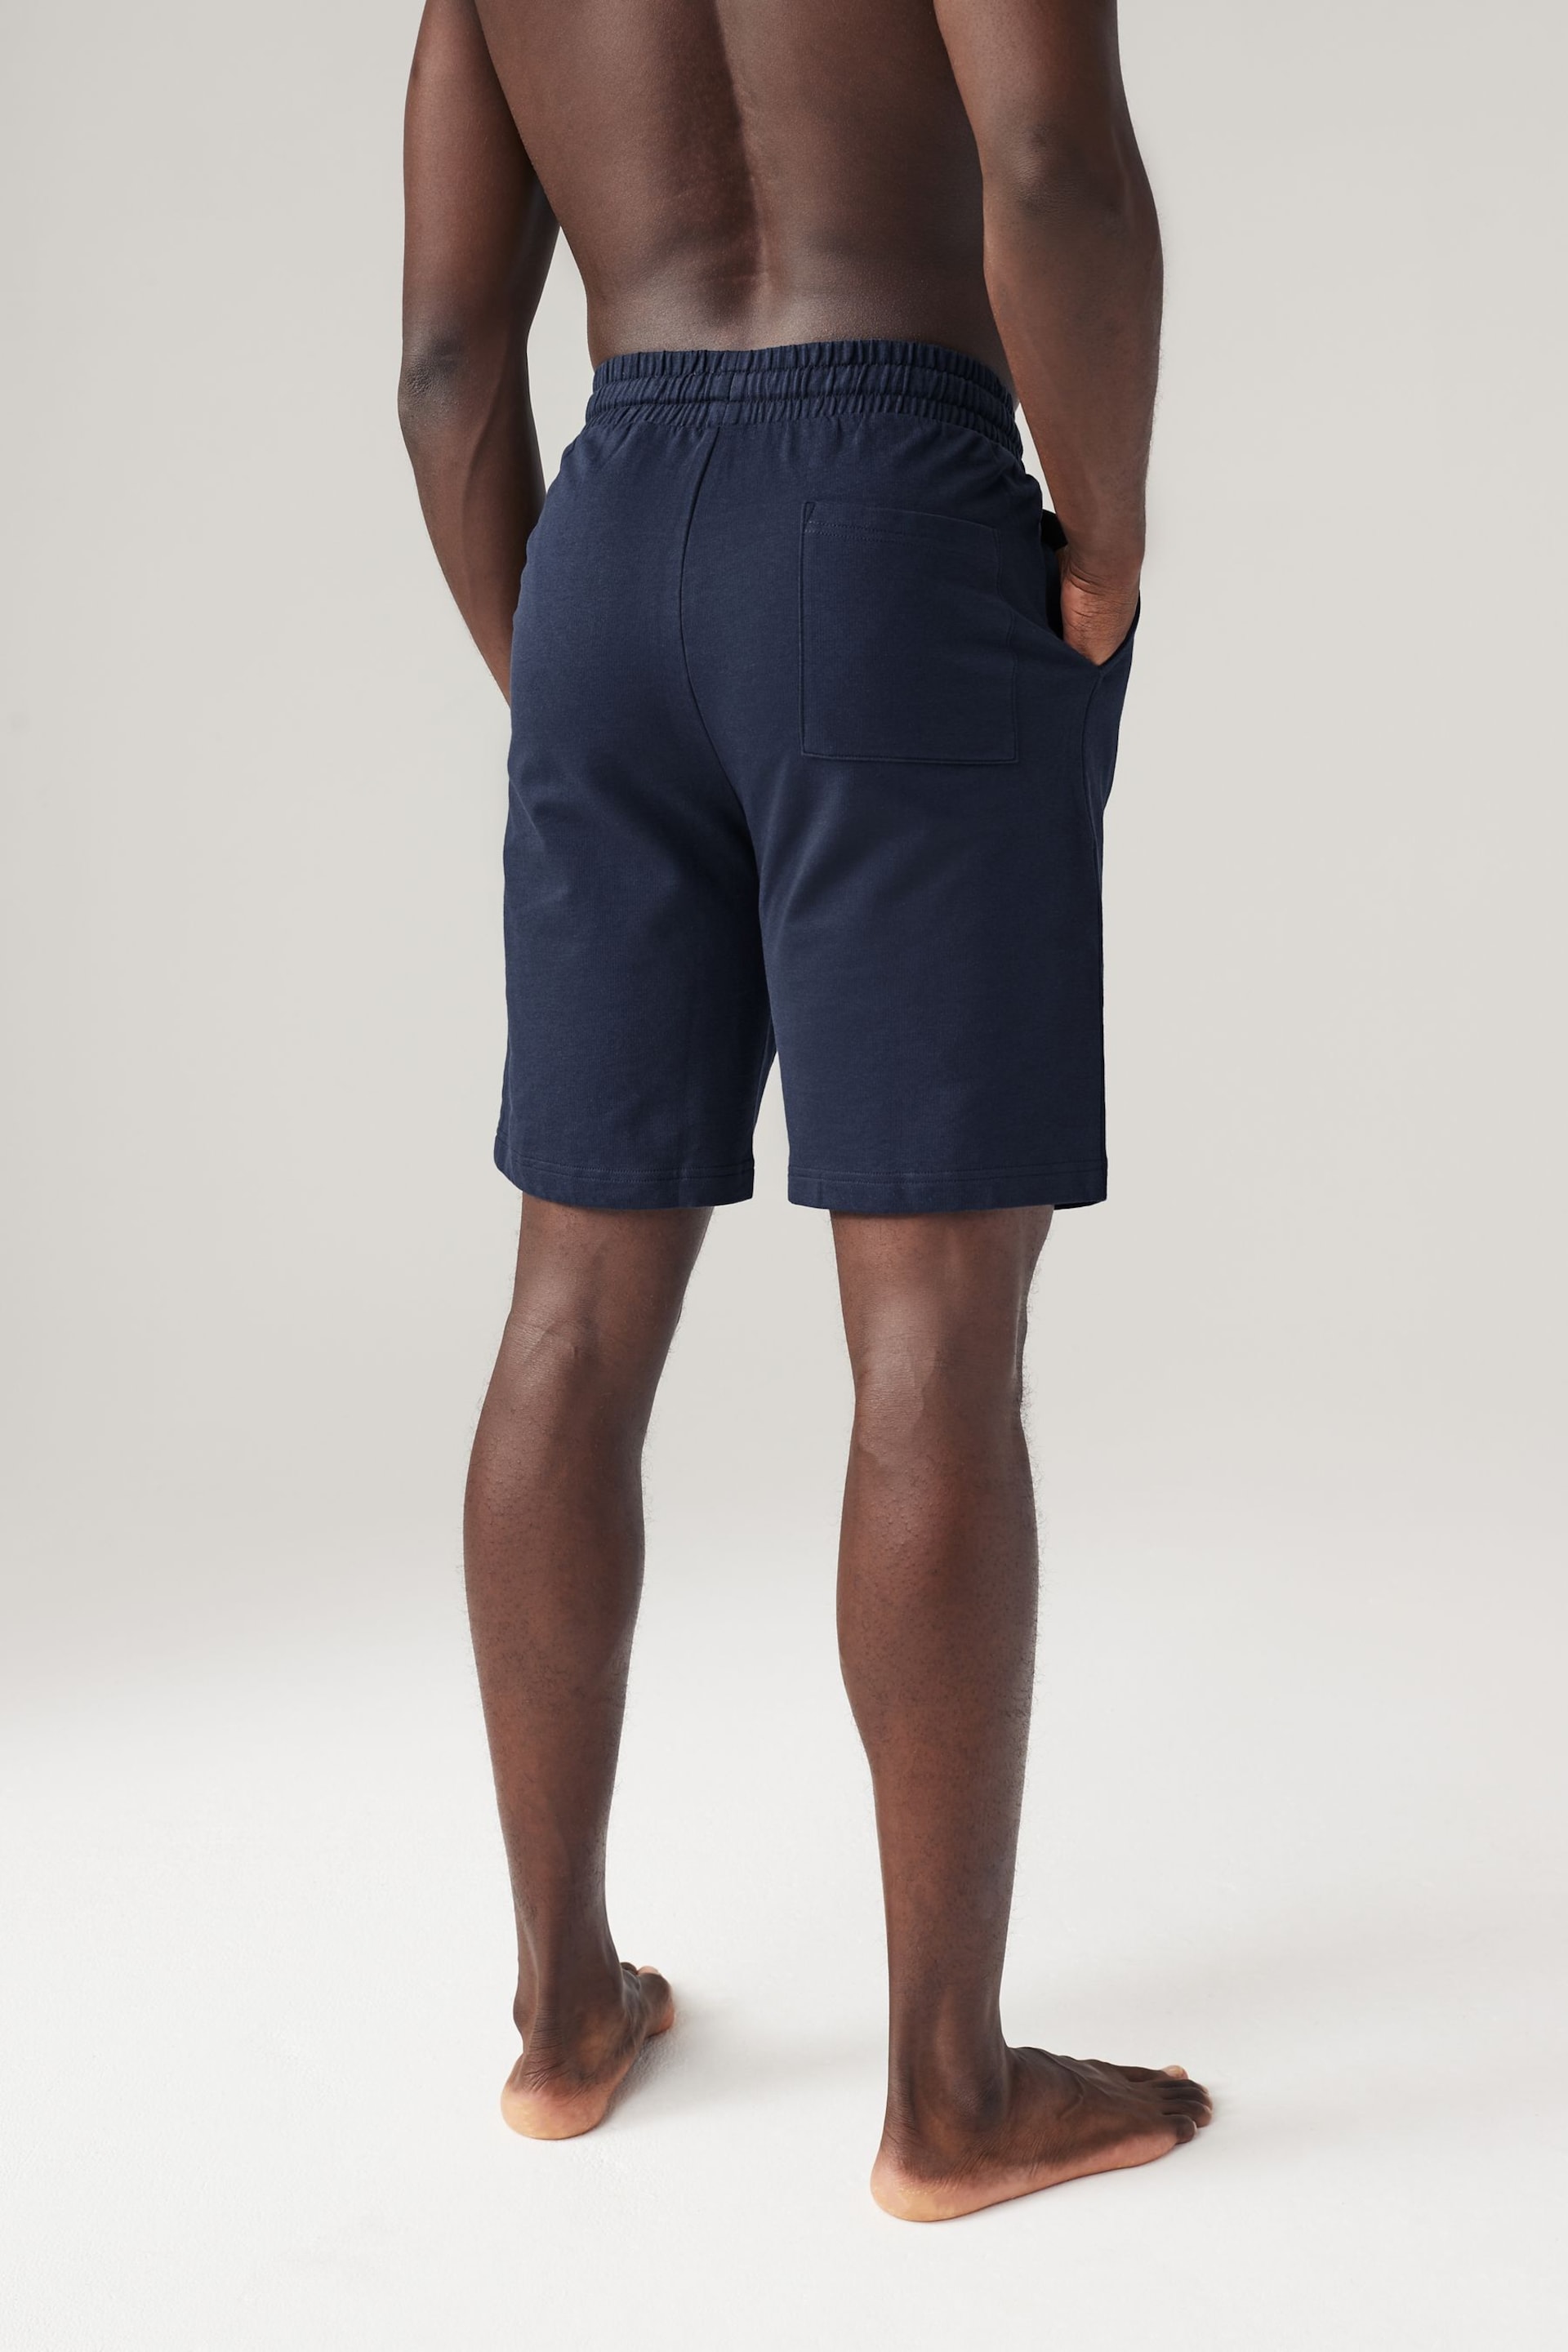 Navy Blue Lightweight Jogger Shorts 2 Pack - Image 4 of 11